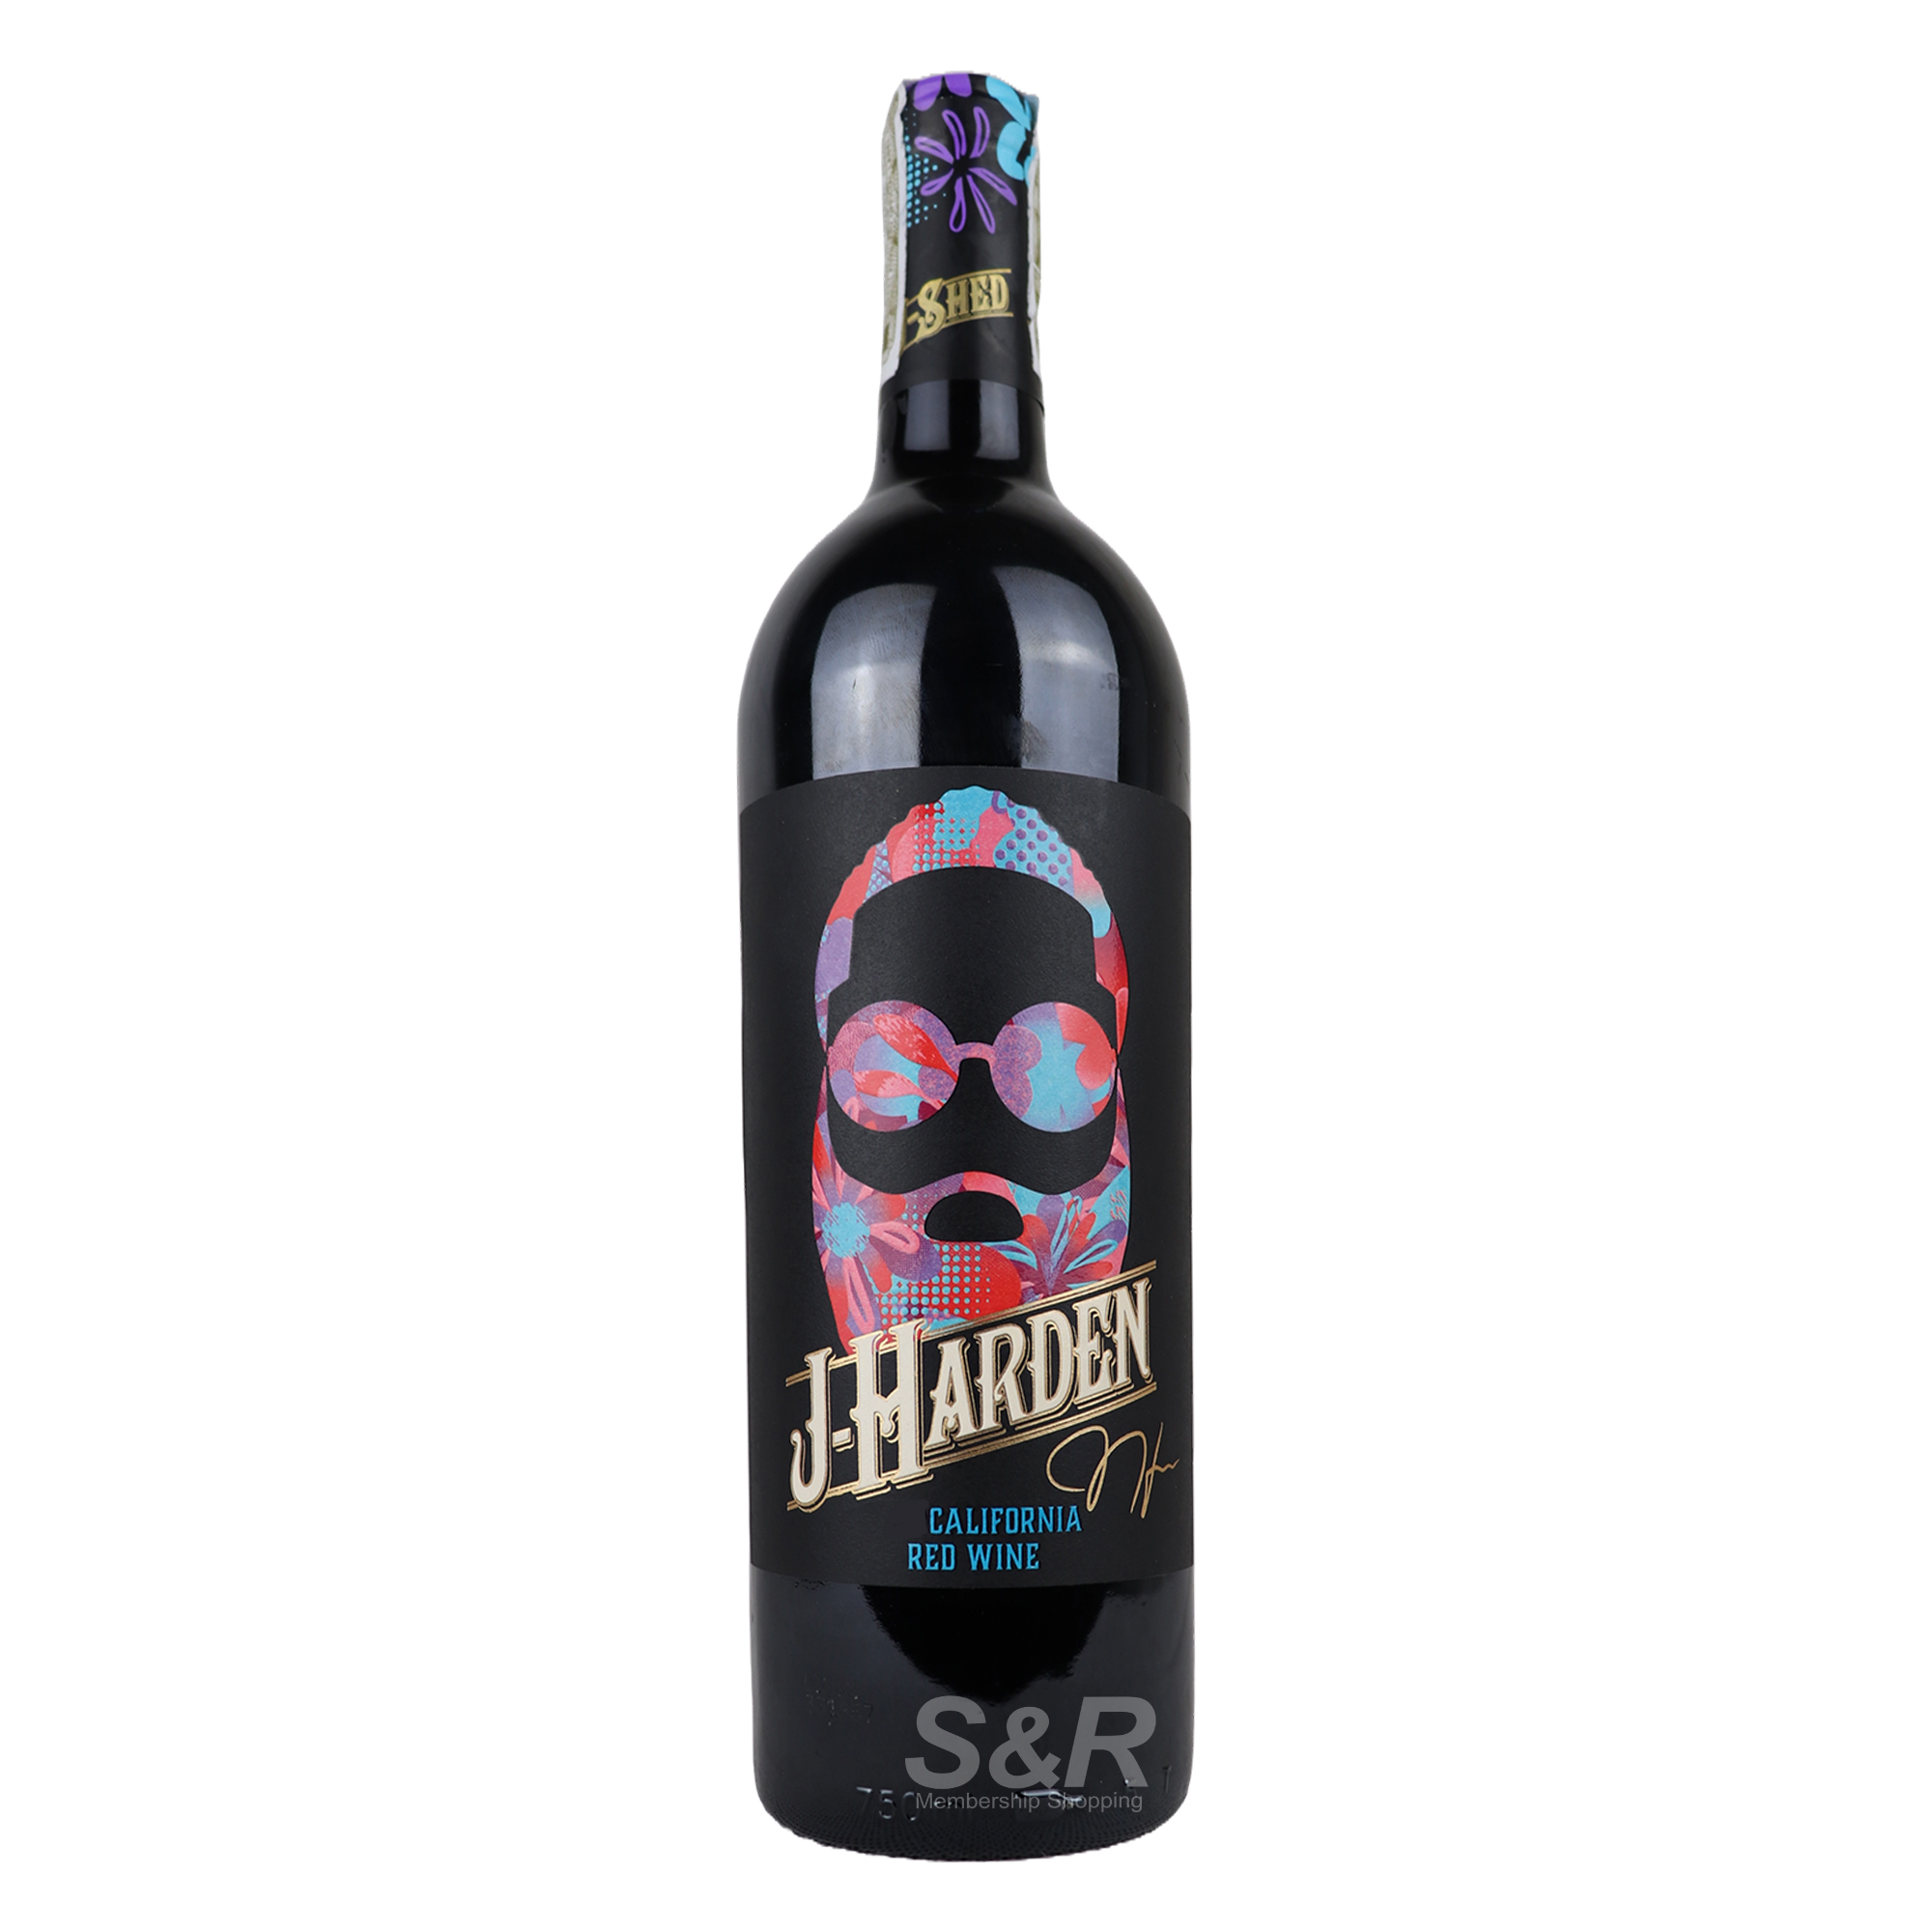 James Harden X J-Shed California Red Wine 750mL